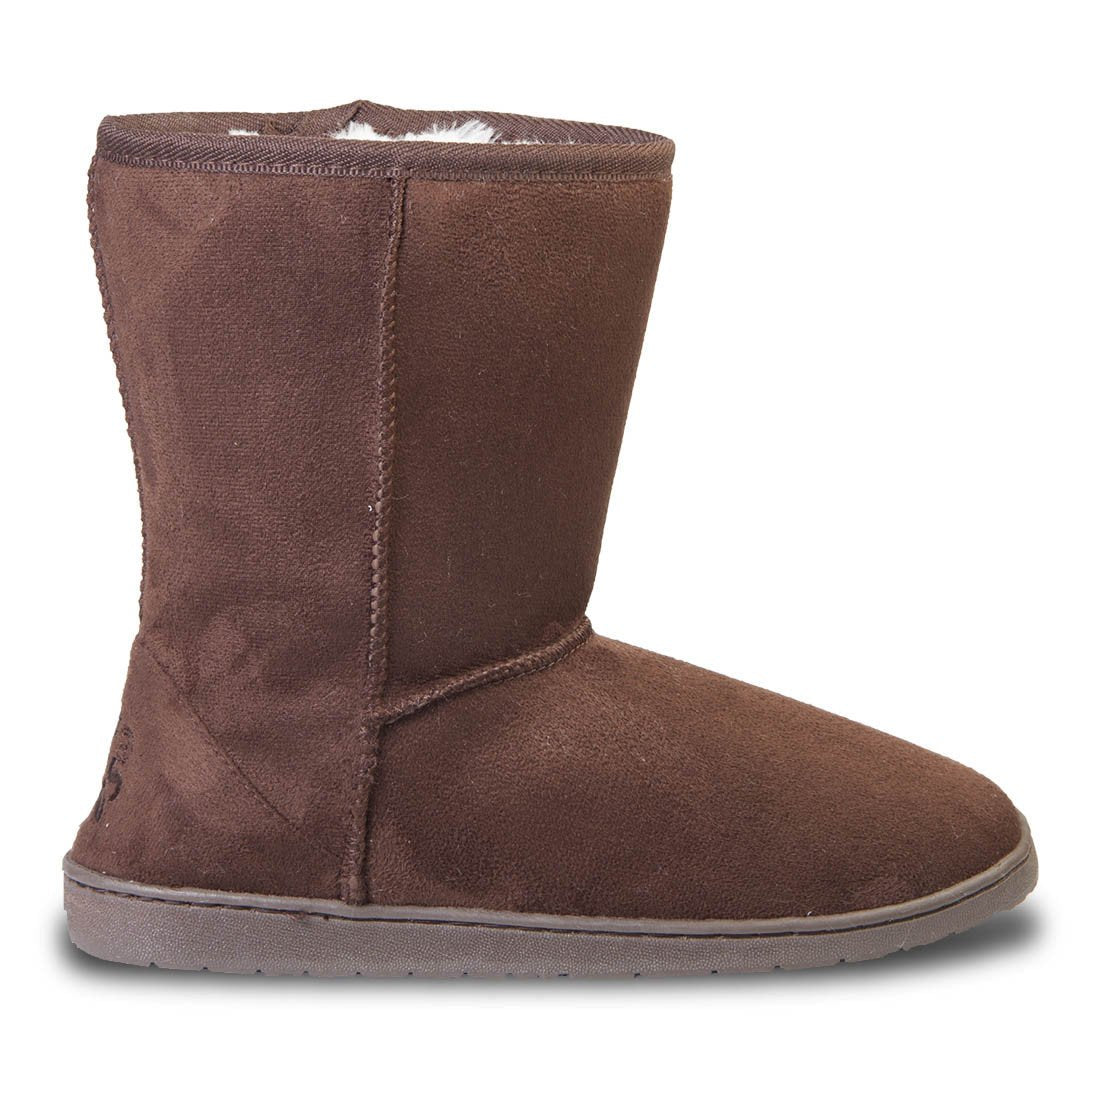 Image of Women's 9-inch Microfiber Boots